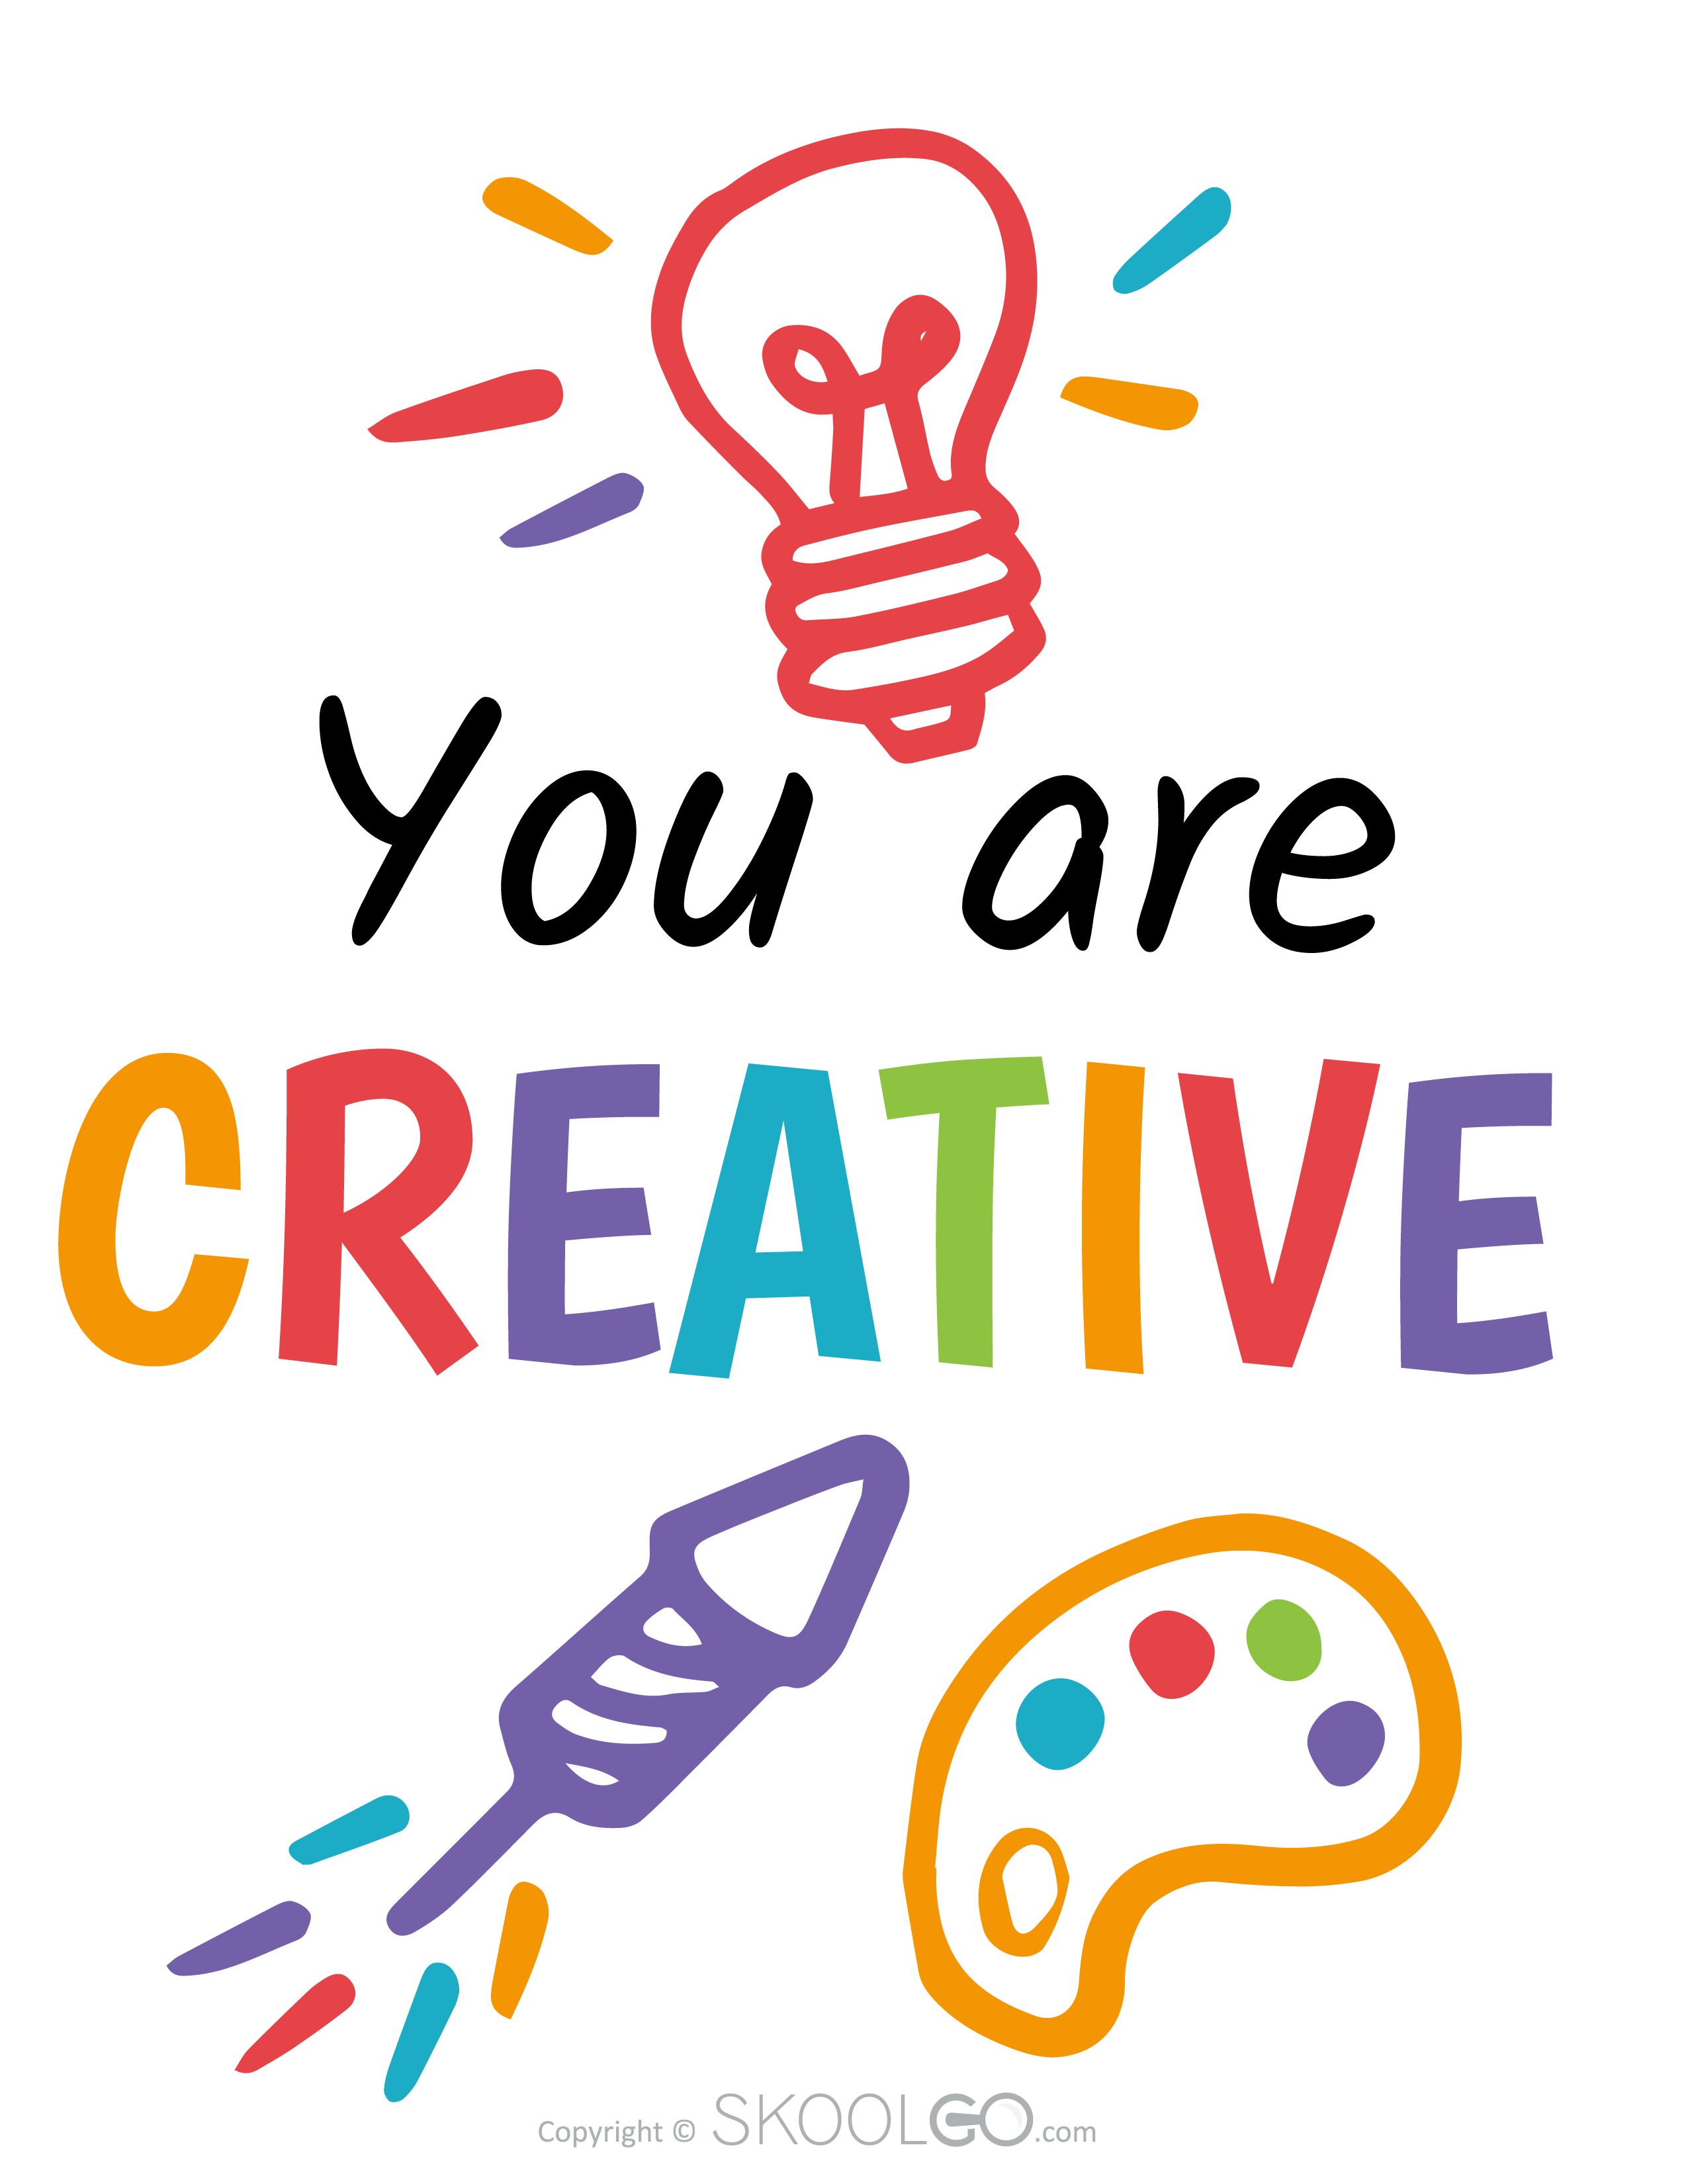 You Are Creative - Free Poster